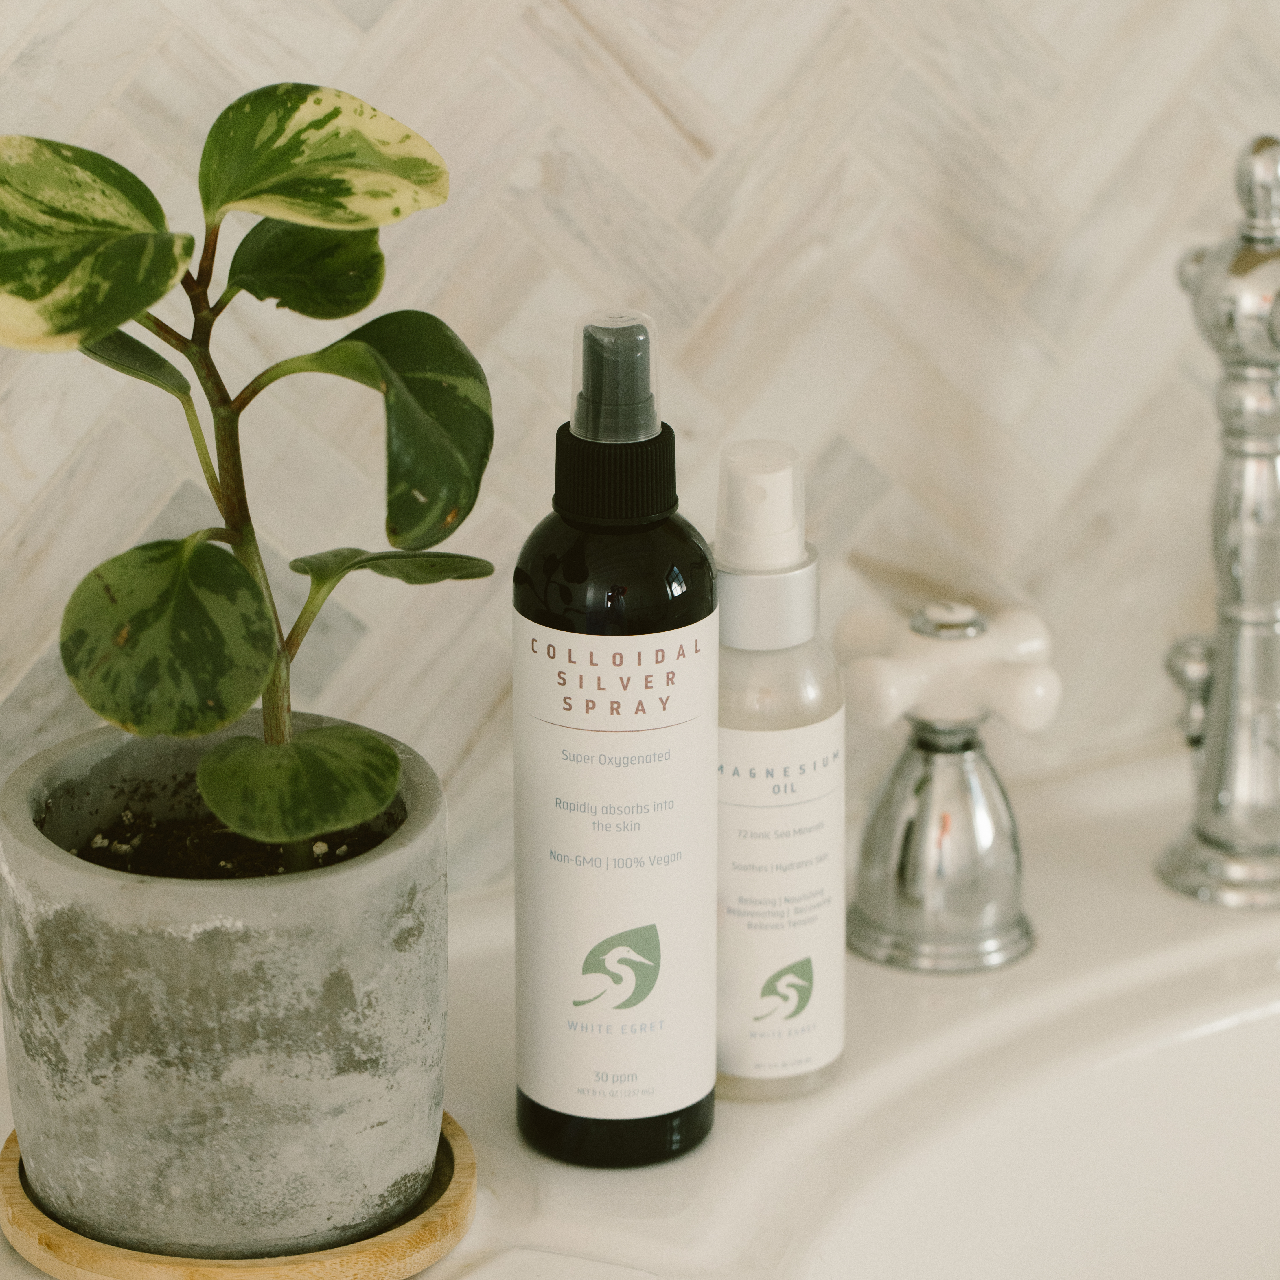 White Egret's Colloidal Silver Spray on a bathroom counter next to White Egret's Magnesium Oil with a potted plant beside it